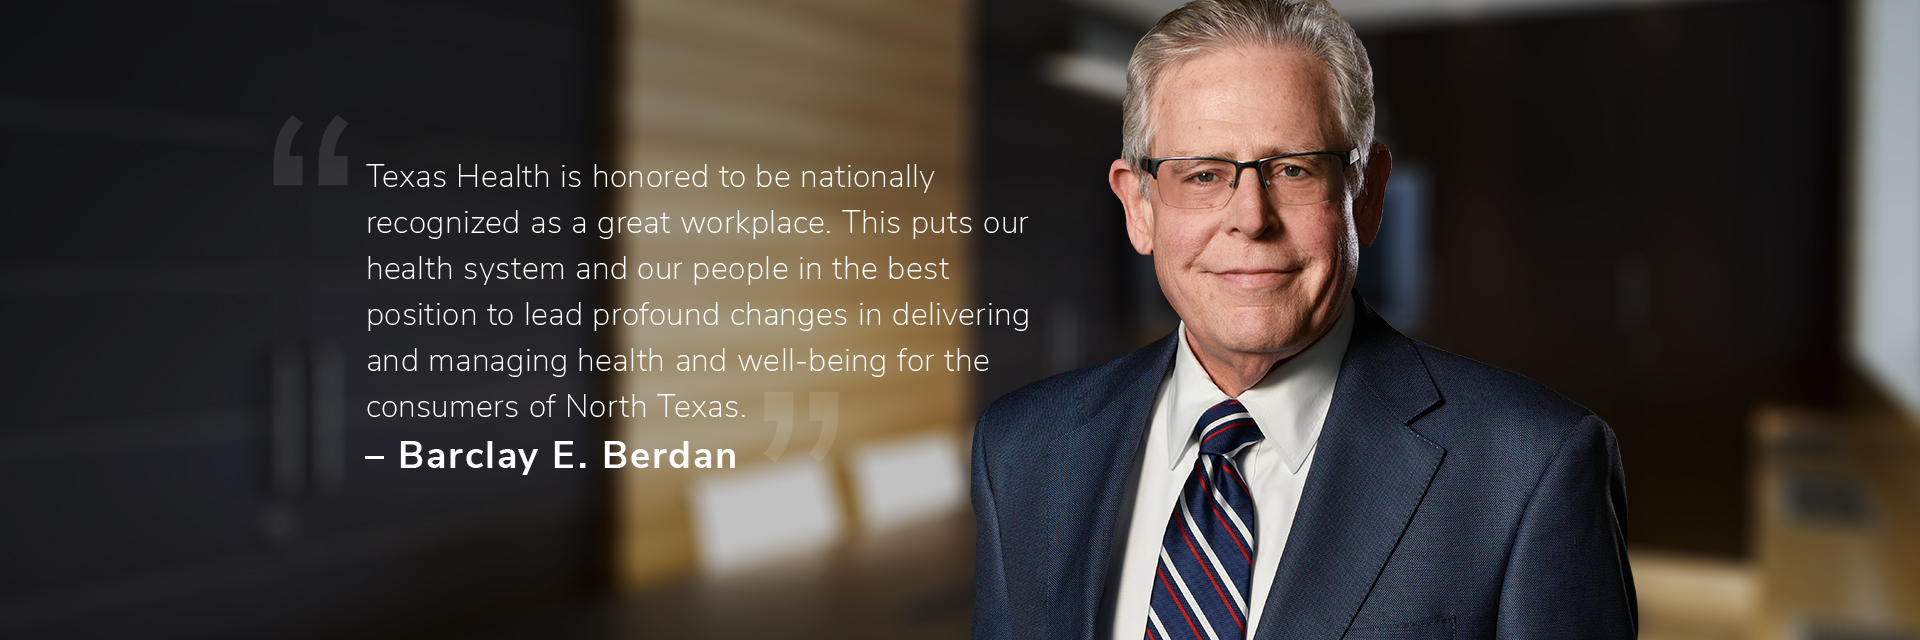 Barclay E. Berdan: Texas Health is honored to be nationally recognized as a great workplace. This puts our health system and our people in the best position to lead profound changes in delivering and managing health and well-being for the consumers of North Texas."